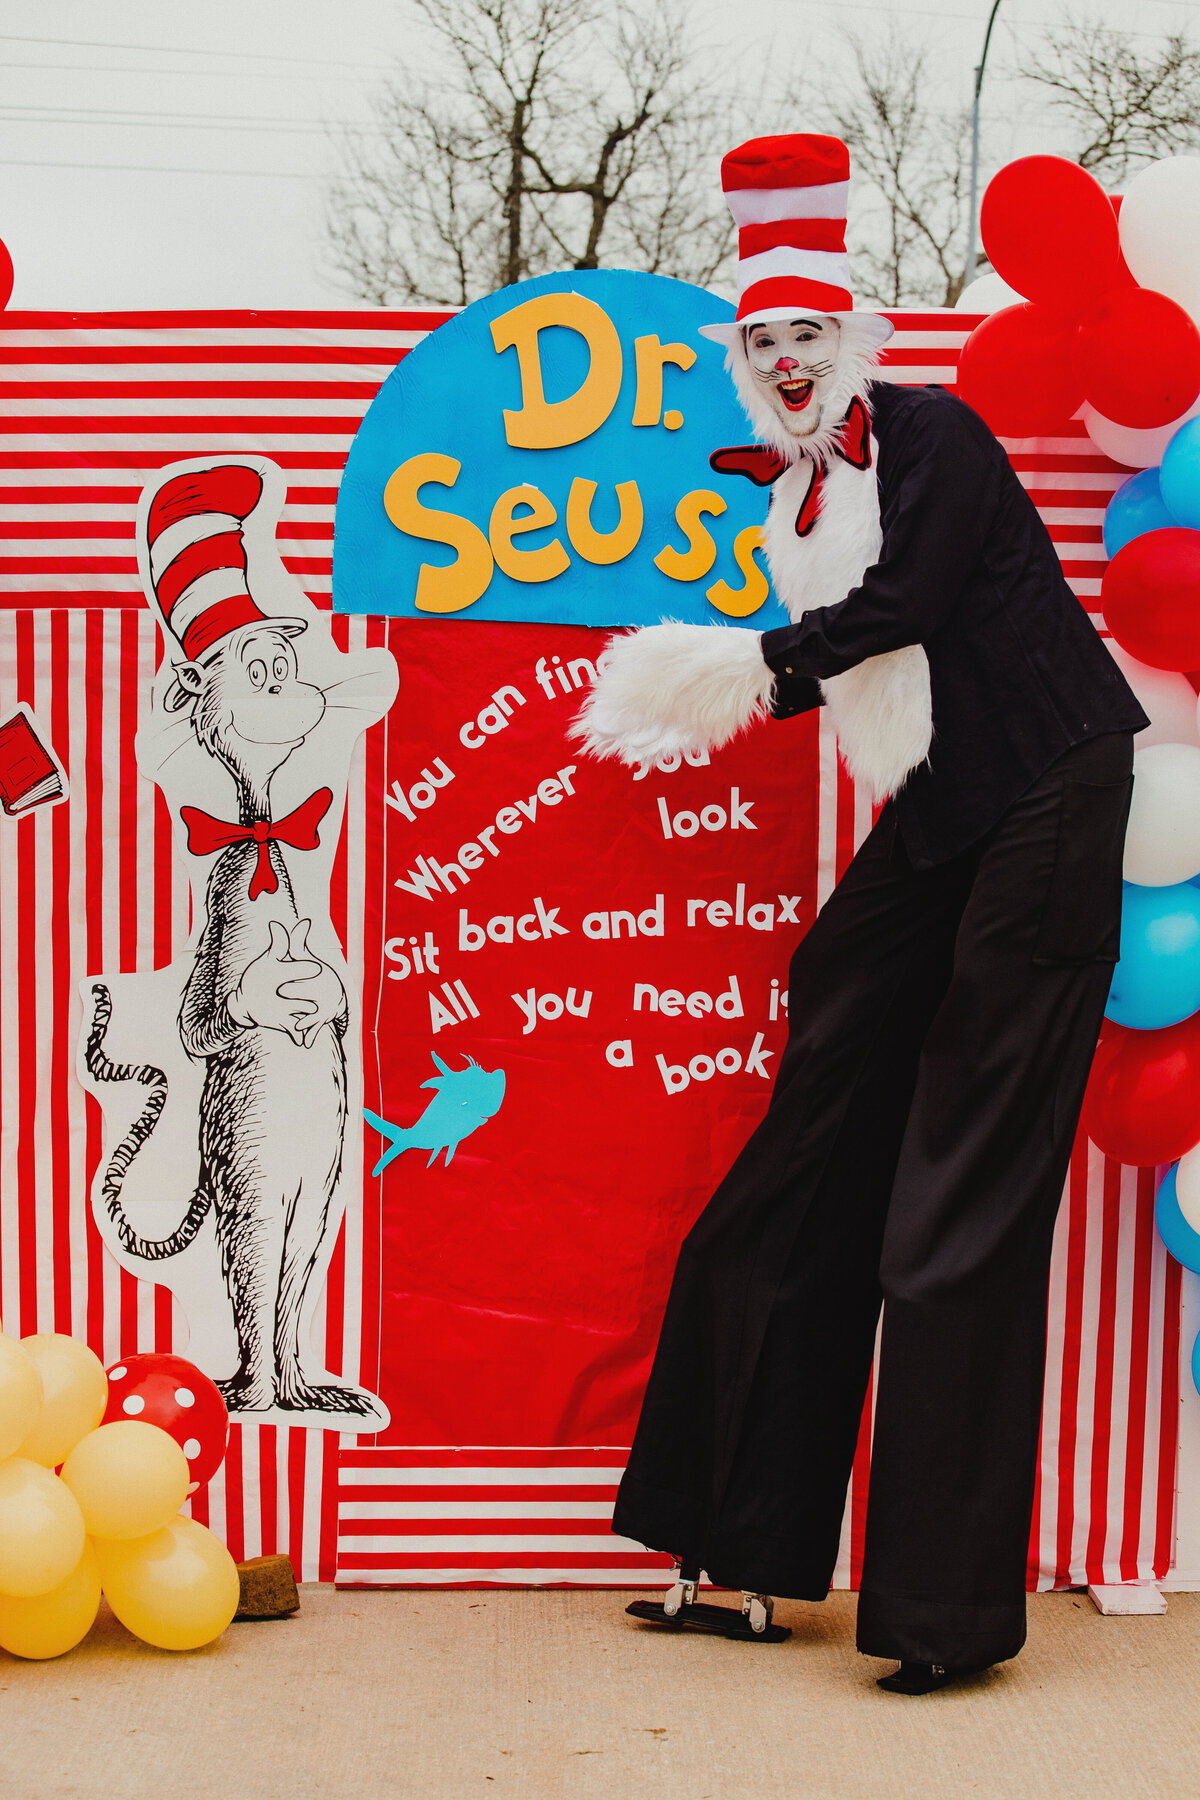 Person wearing a Cat in the Hat costume standing in front of a red, blue and yellow Dr. Seuss themed backdrop display